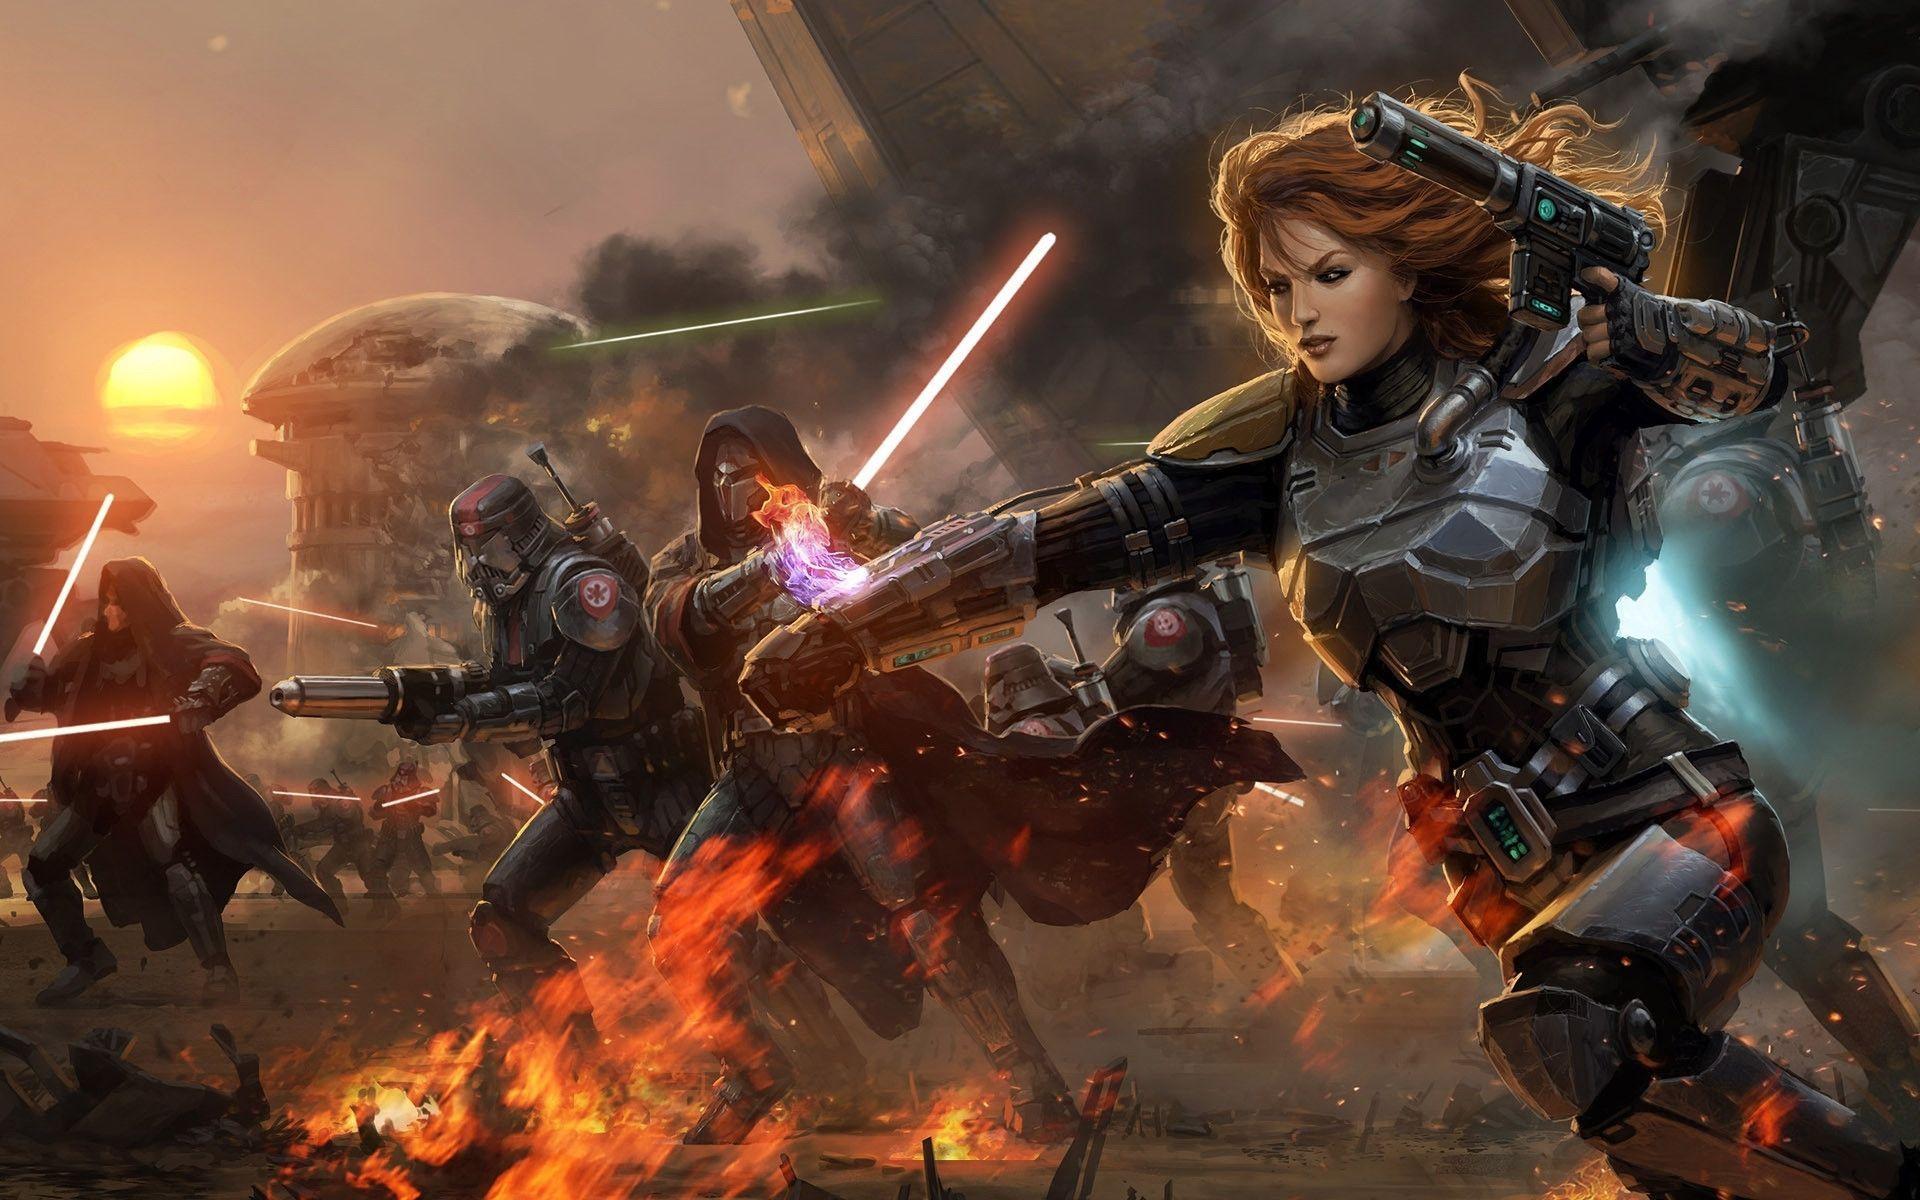 Star Wars The Old Republic Wallpaper, Game Widescreen. HD